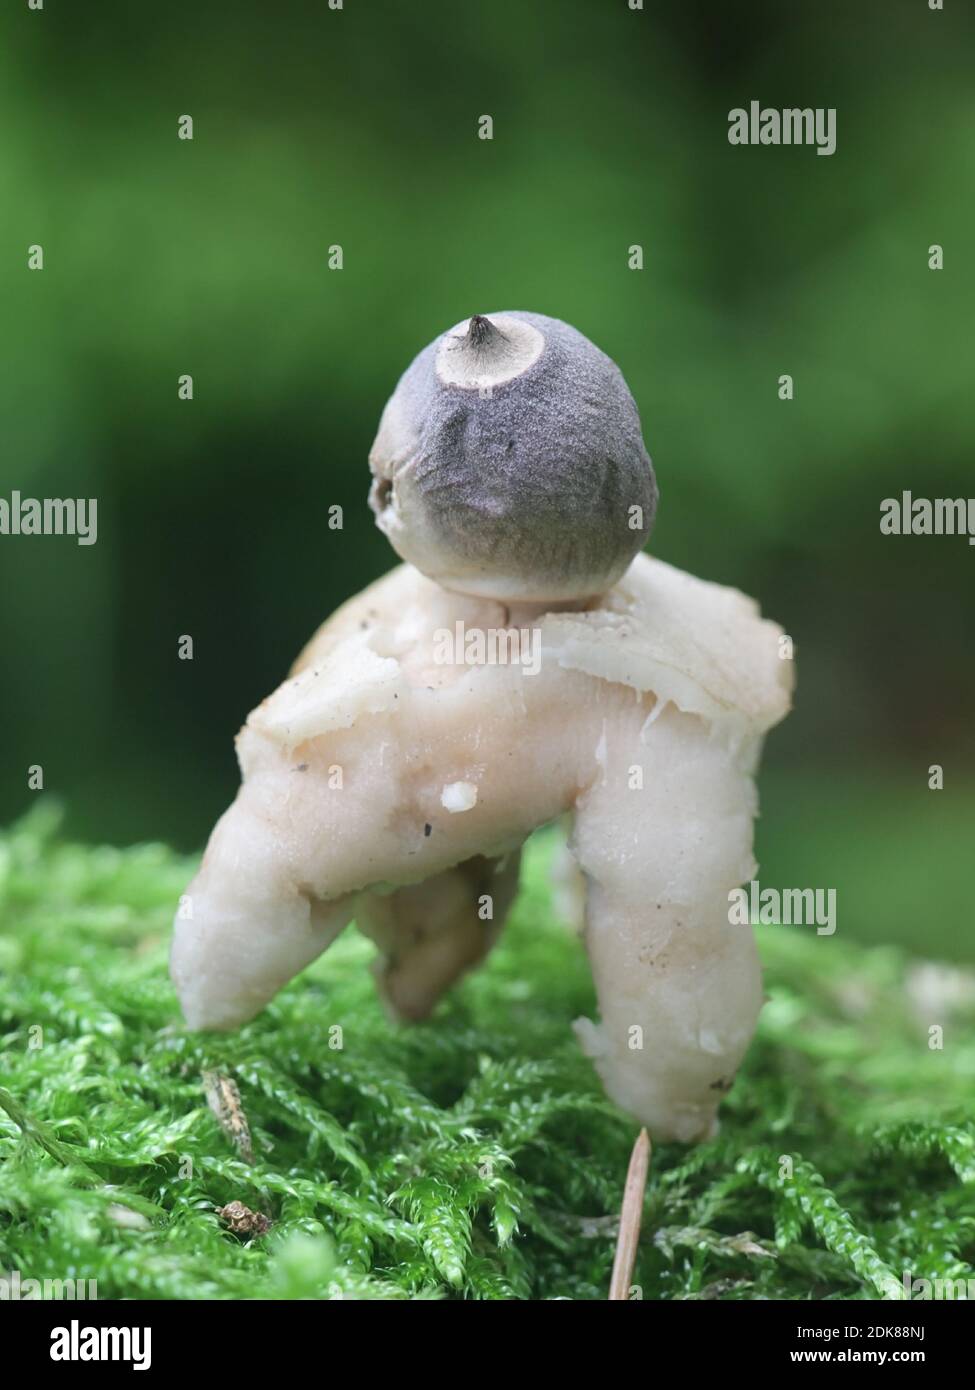 Geastrum quadrifidum, known as the rayed earthstar or four-footed earthstar, wild fungus from Finland Stock Photo